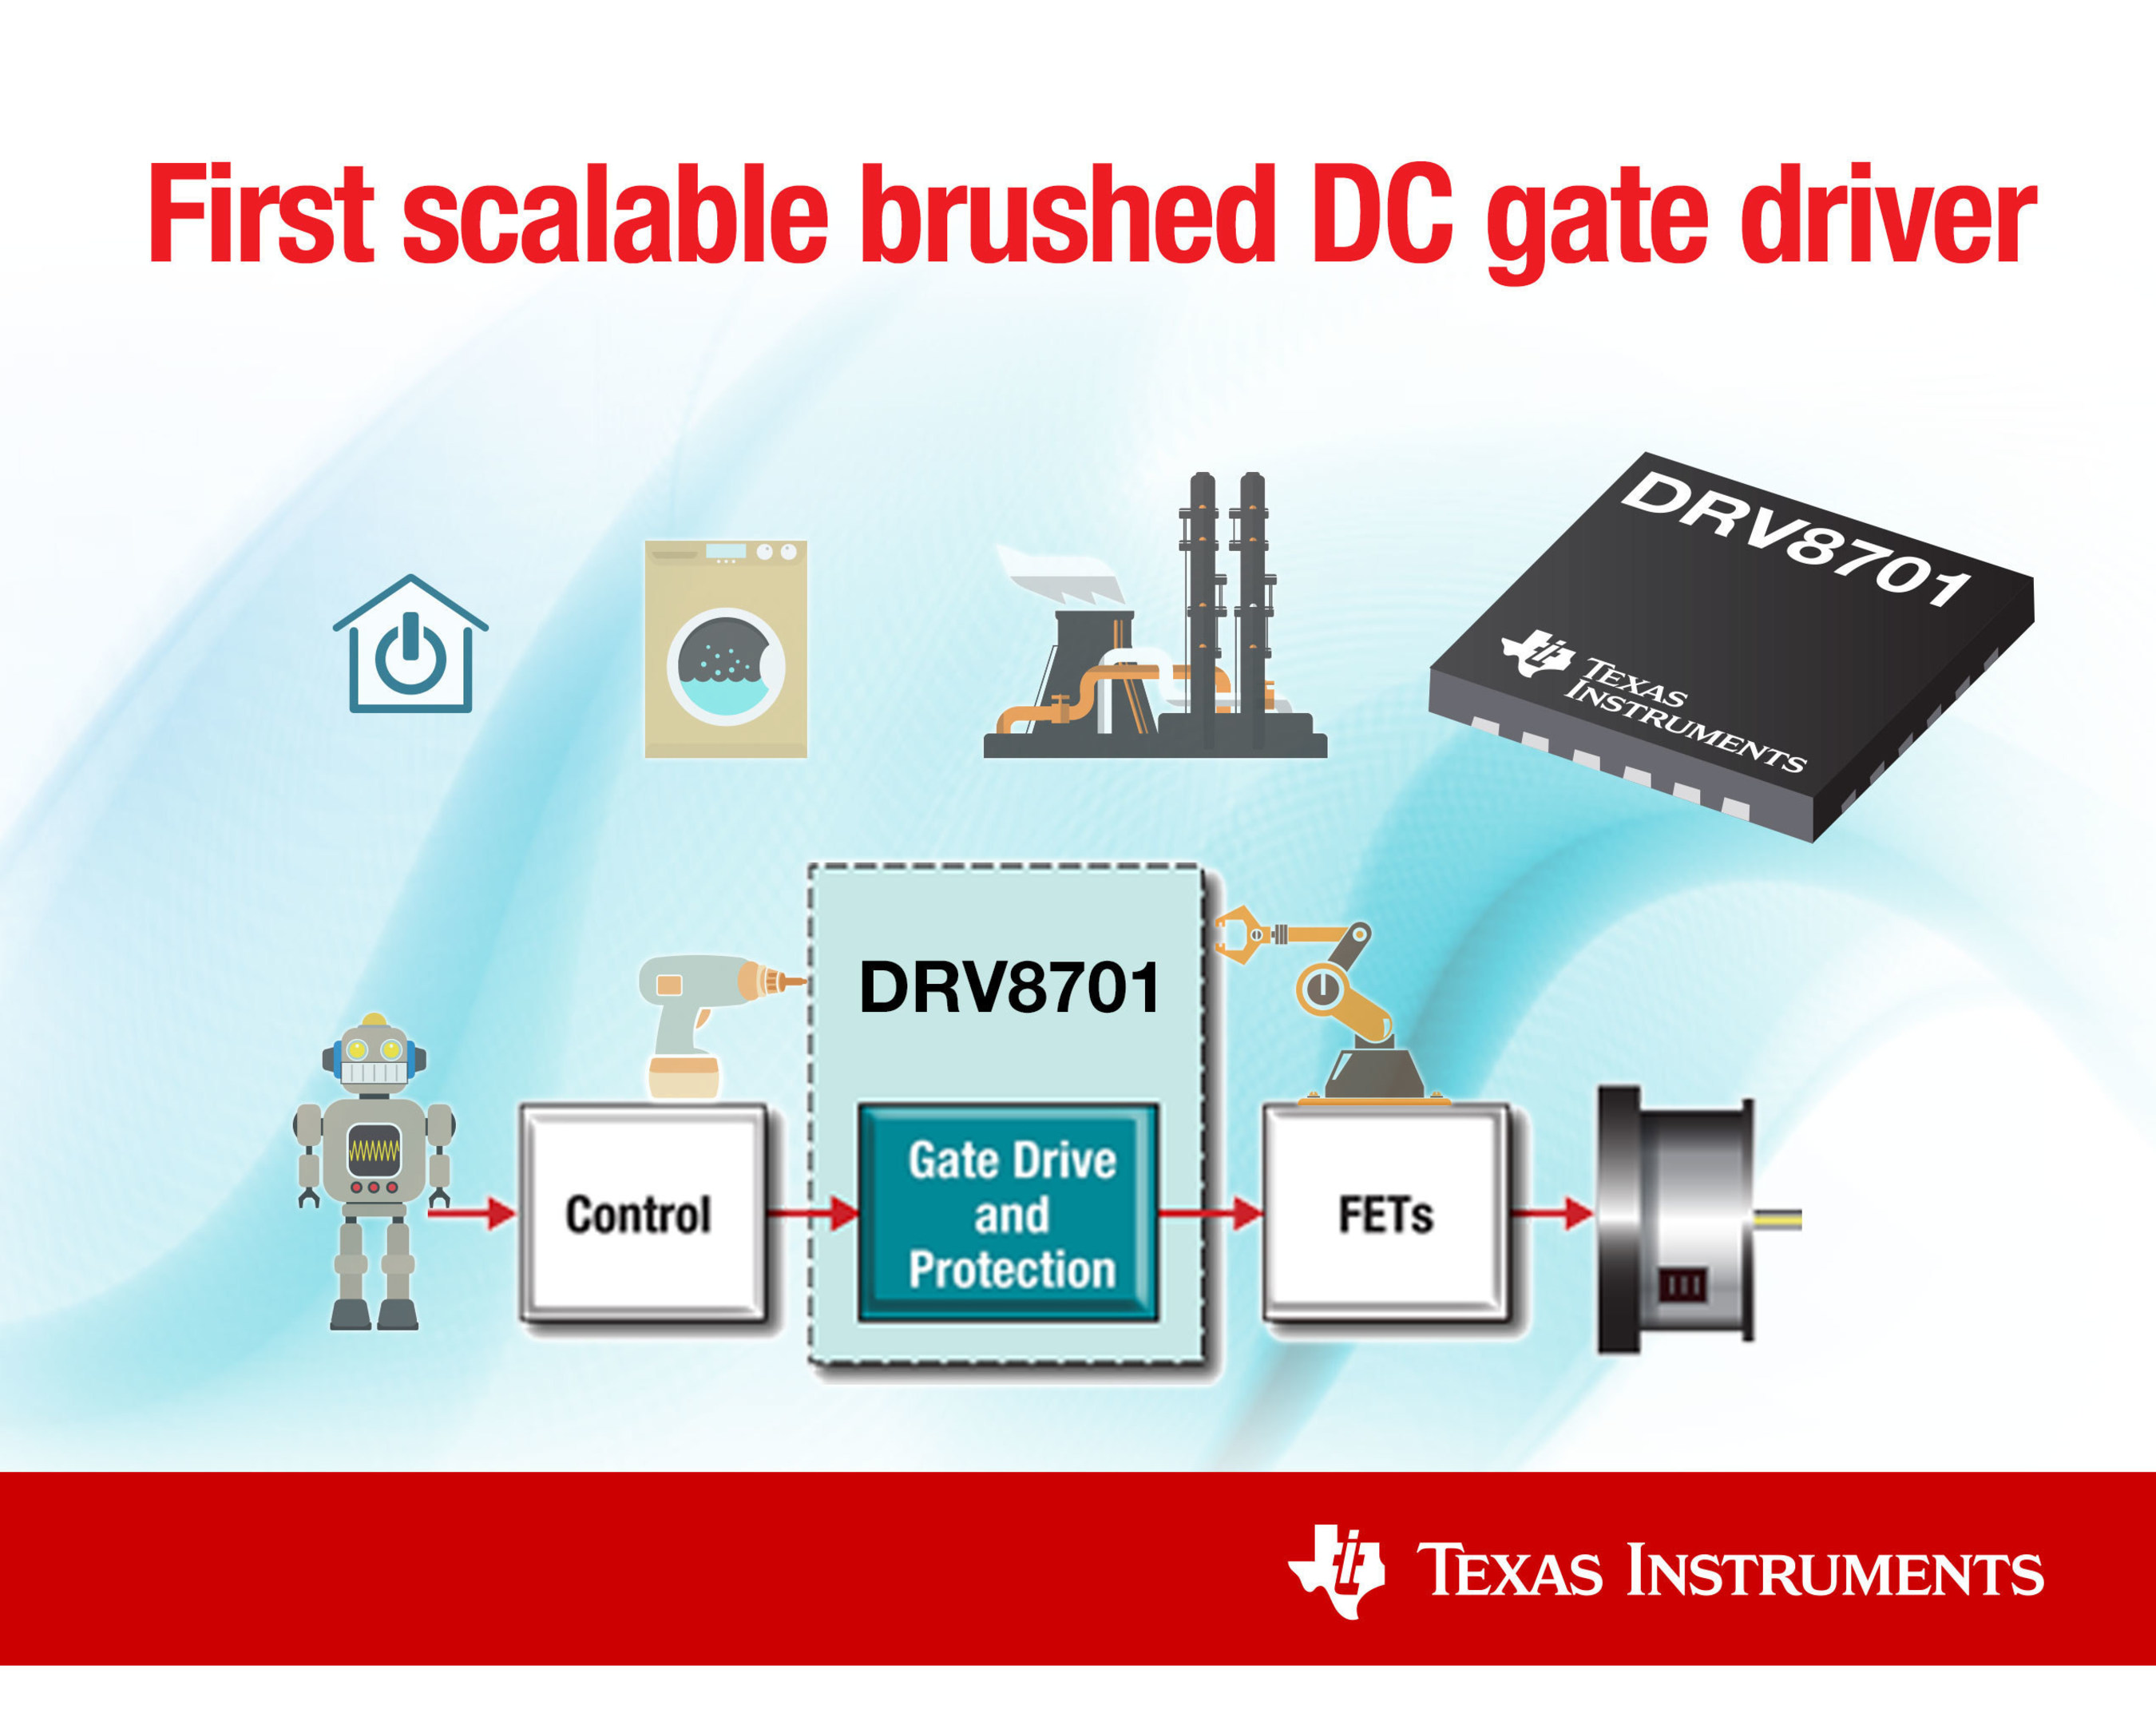 First scalable brushed DC gate driver